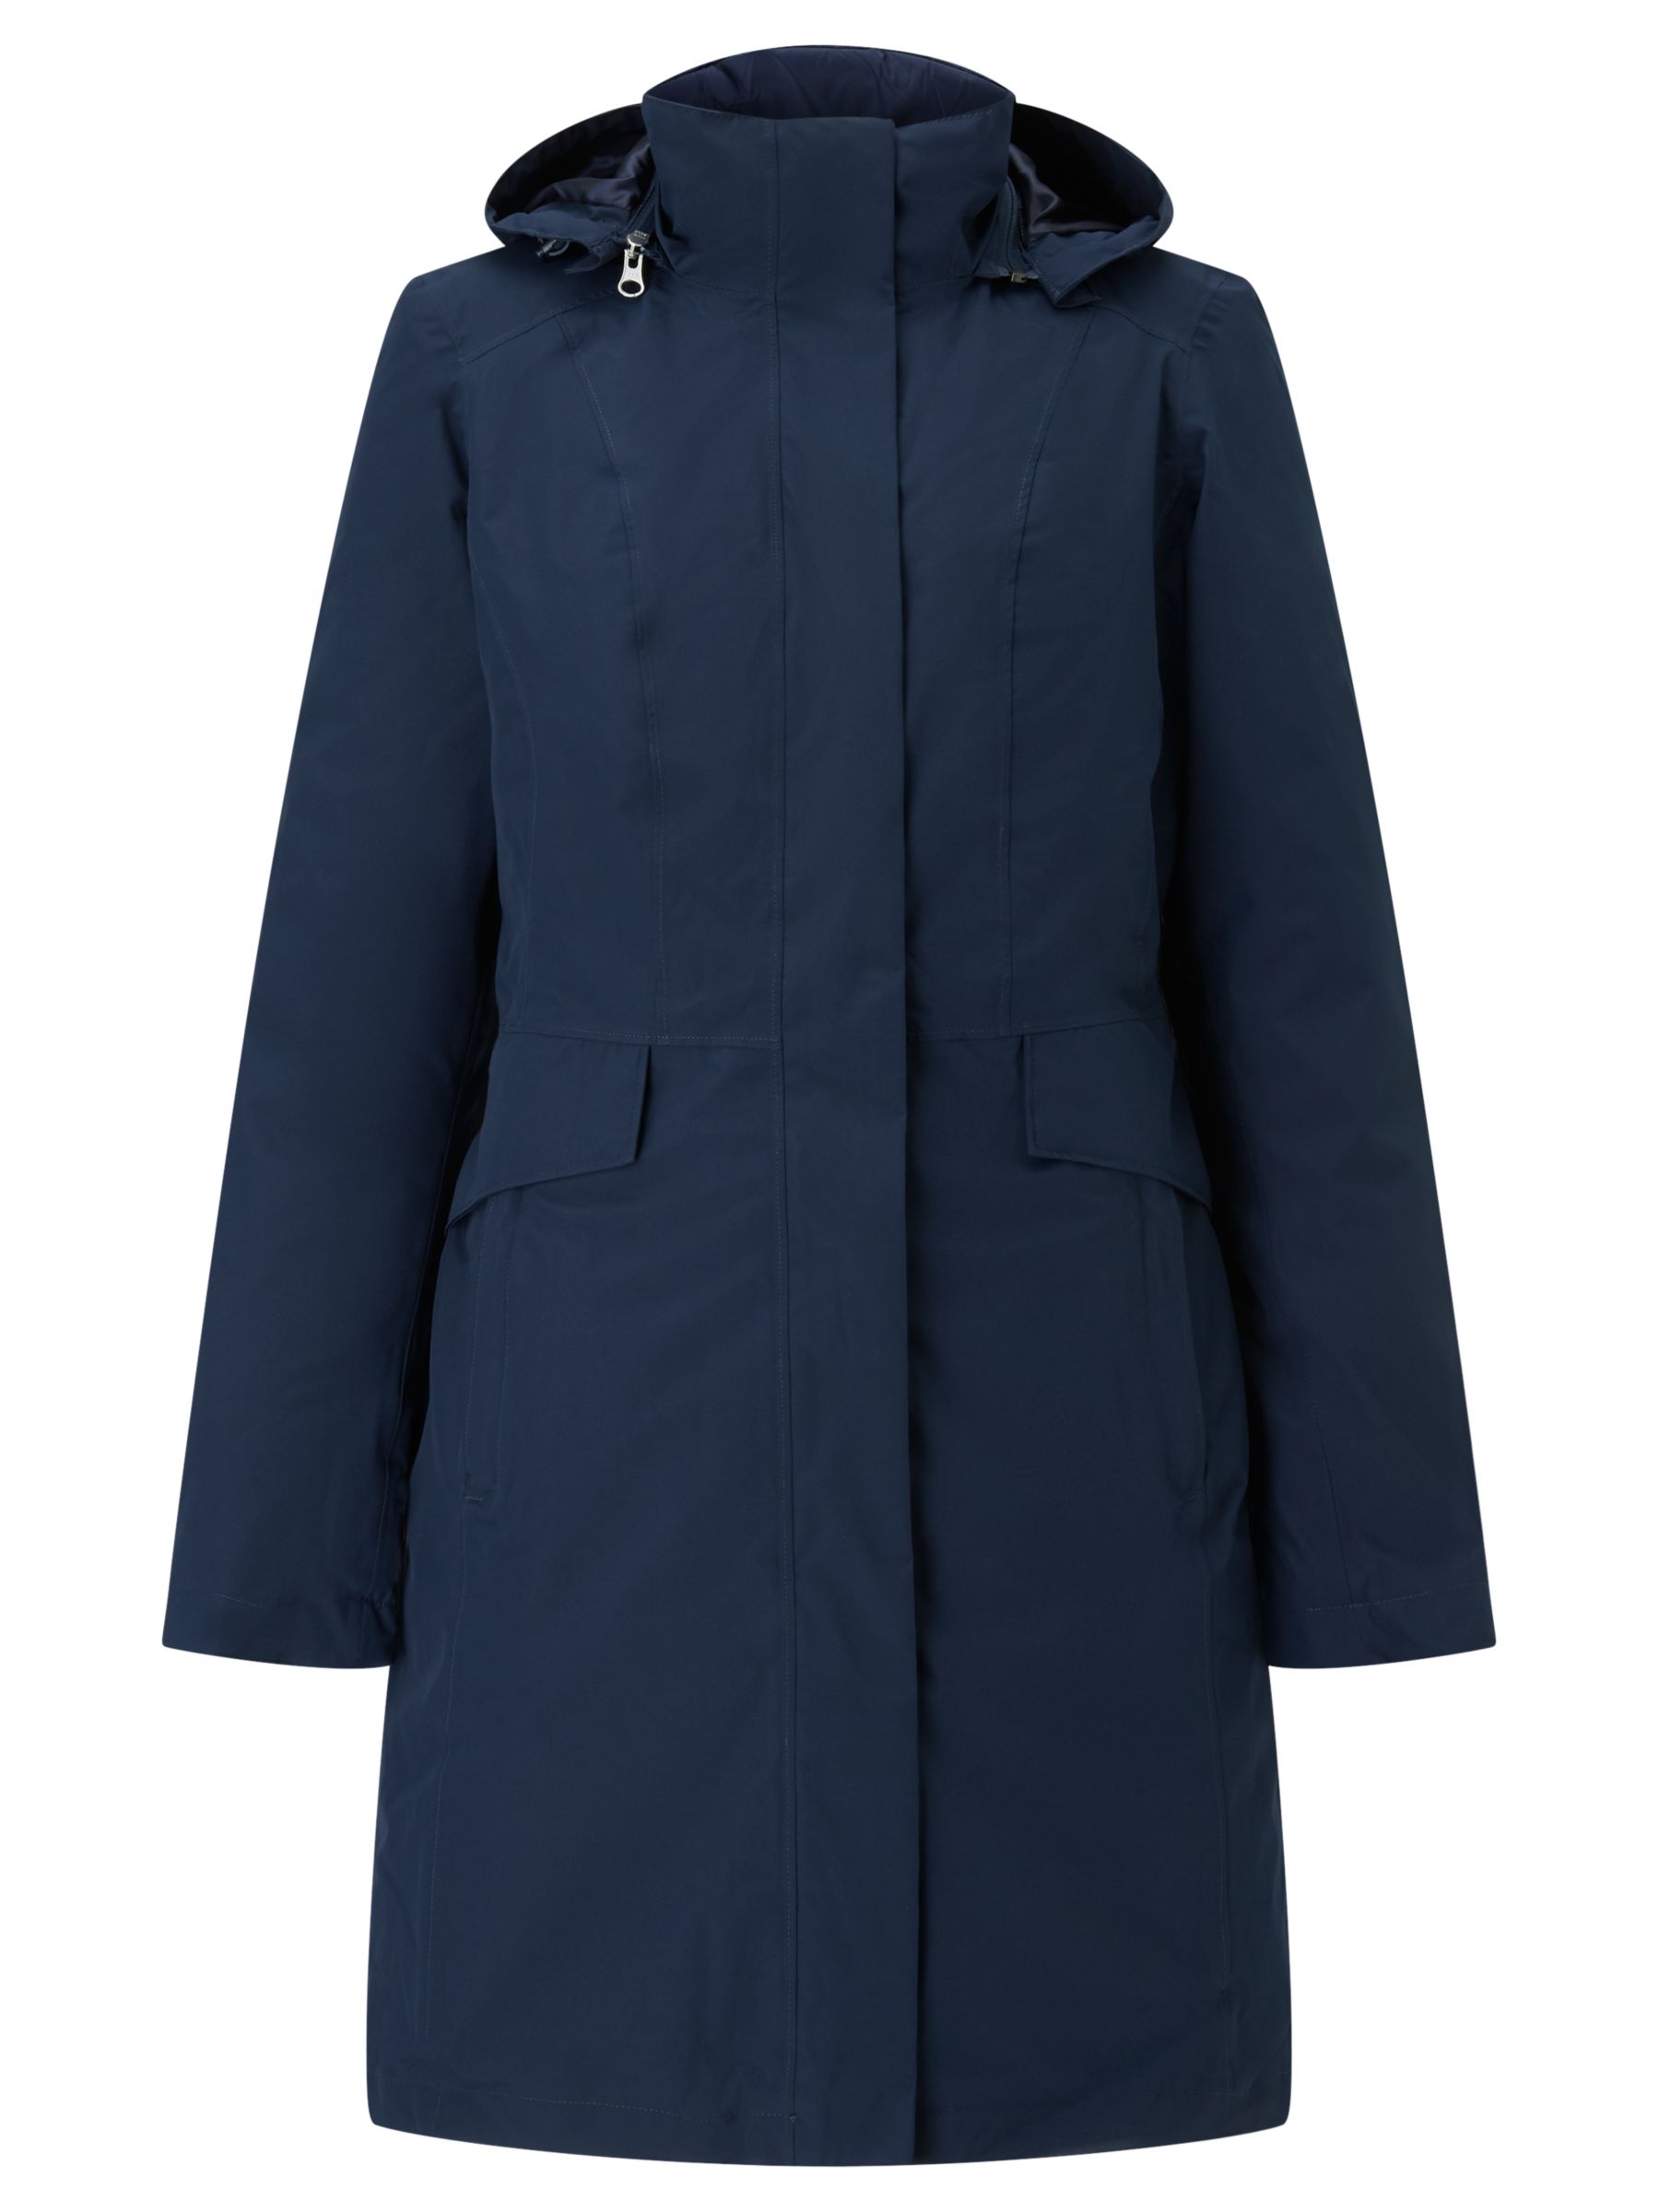 north face suzanne triclimate navy